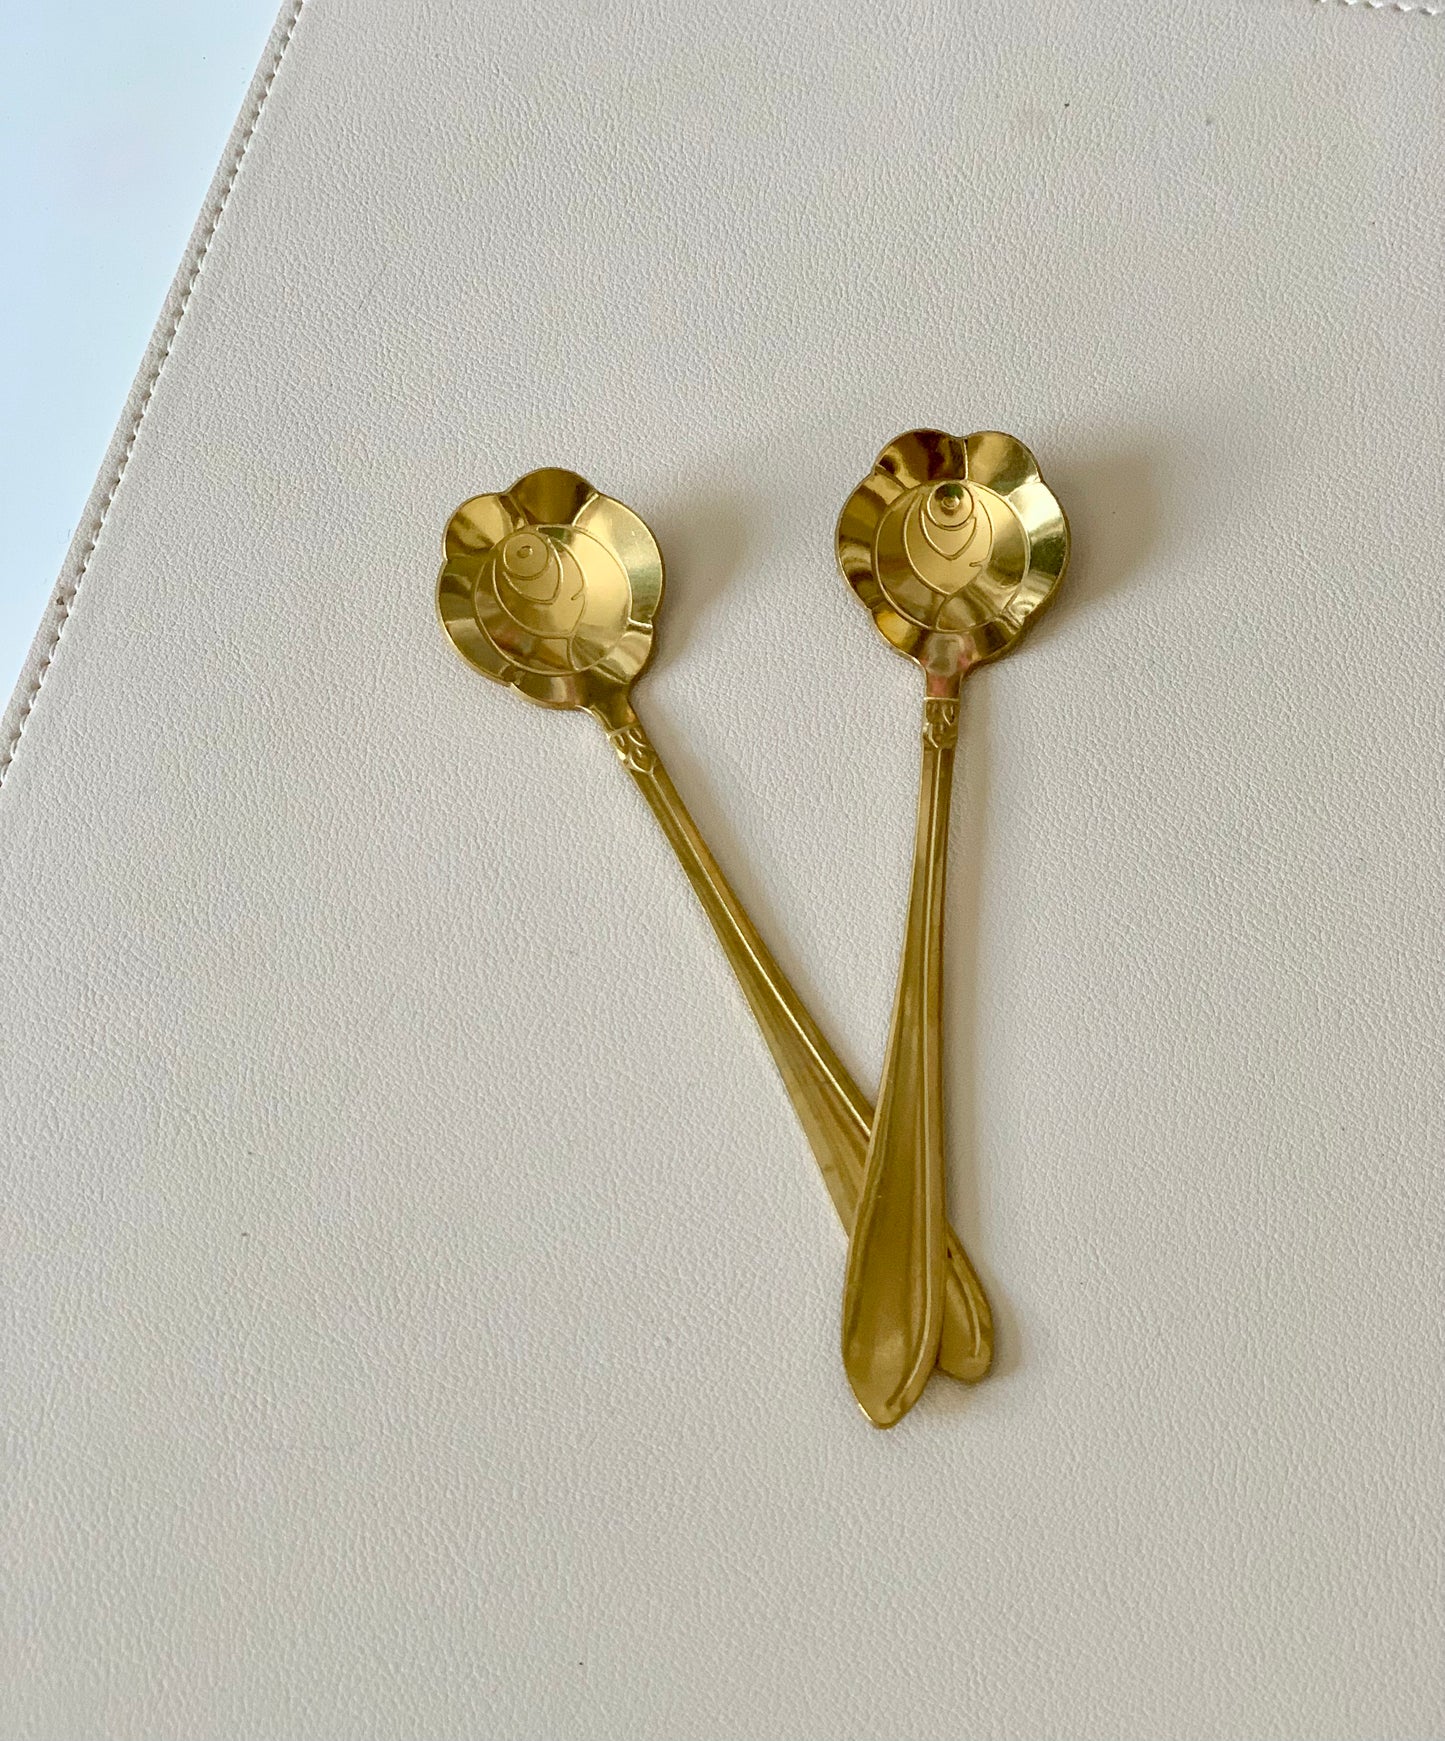 One Gold Floral Spoon